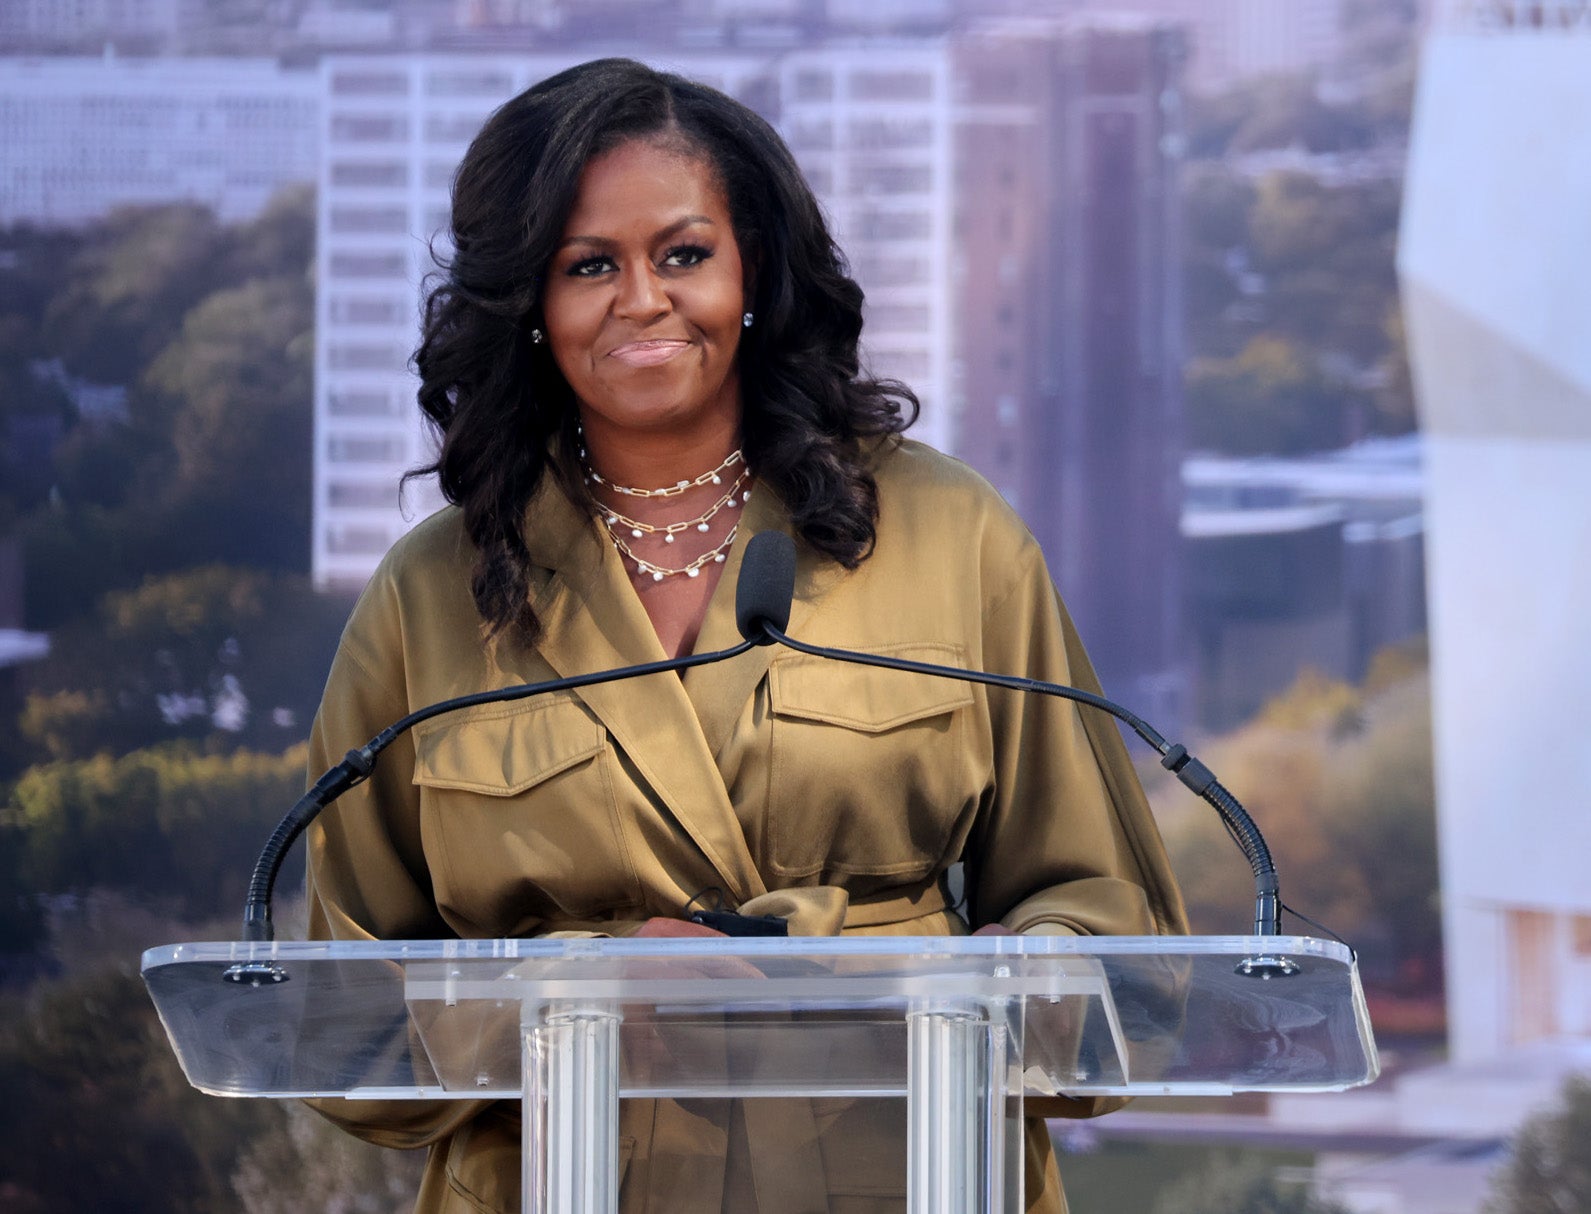 Michelle Obama Announces New Book, 'The Light We Carry'